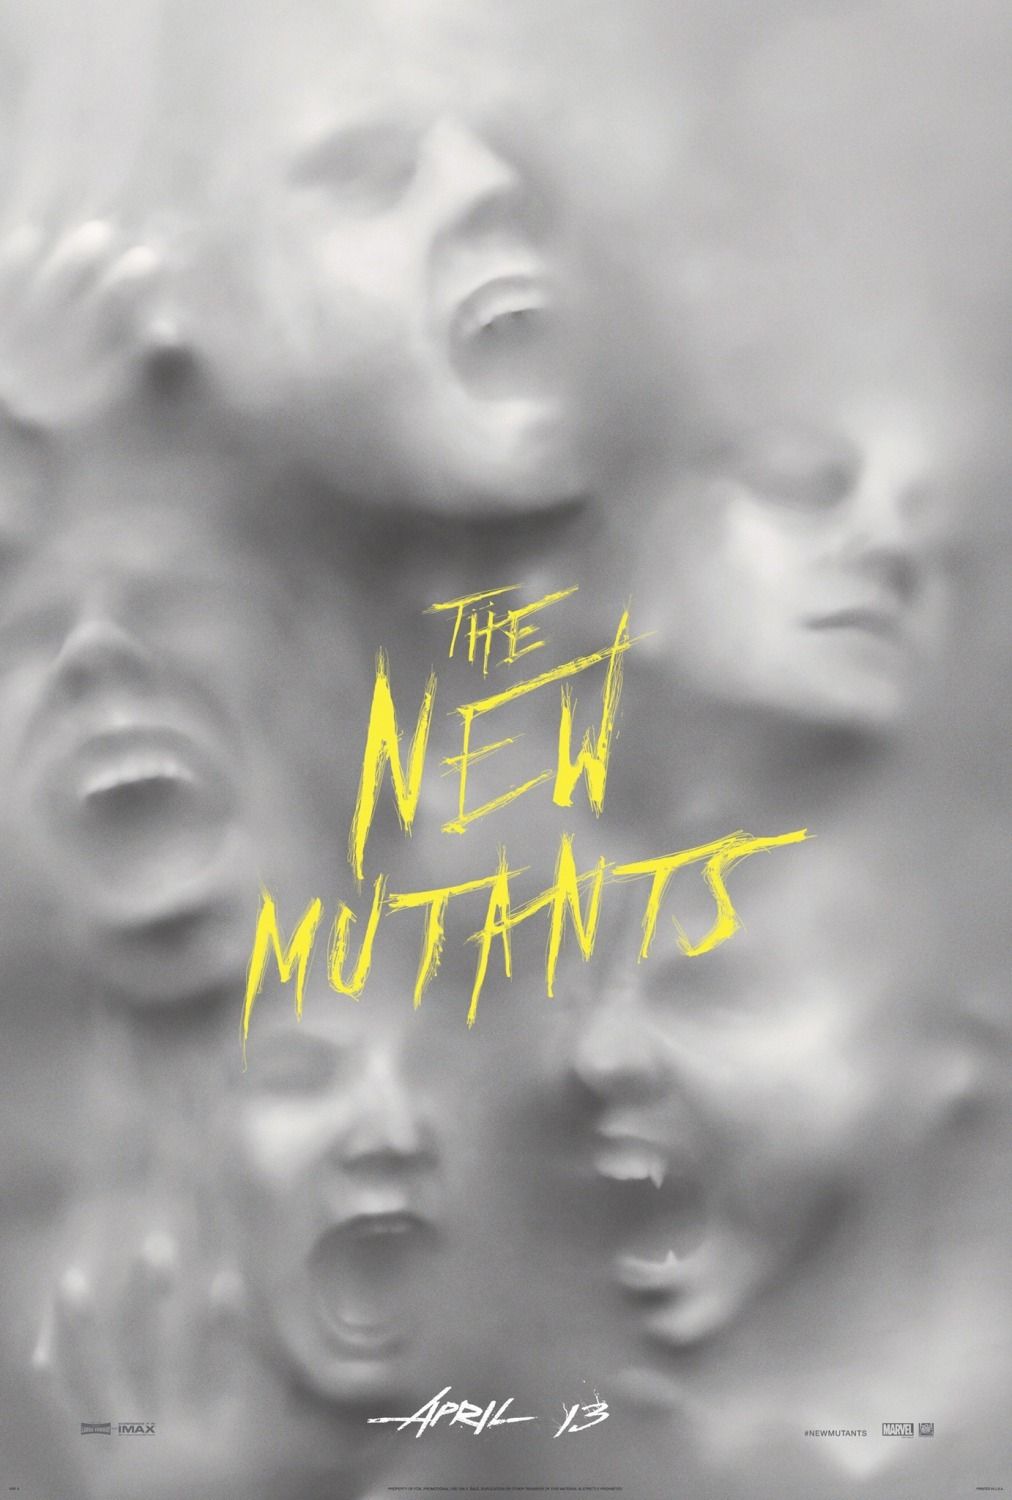 'The New Mutants' Poster